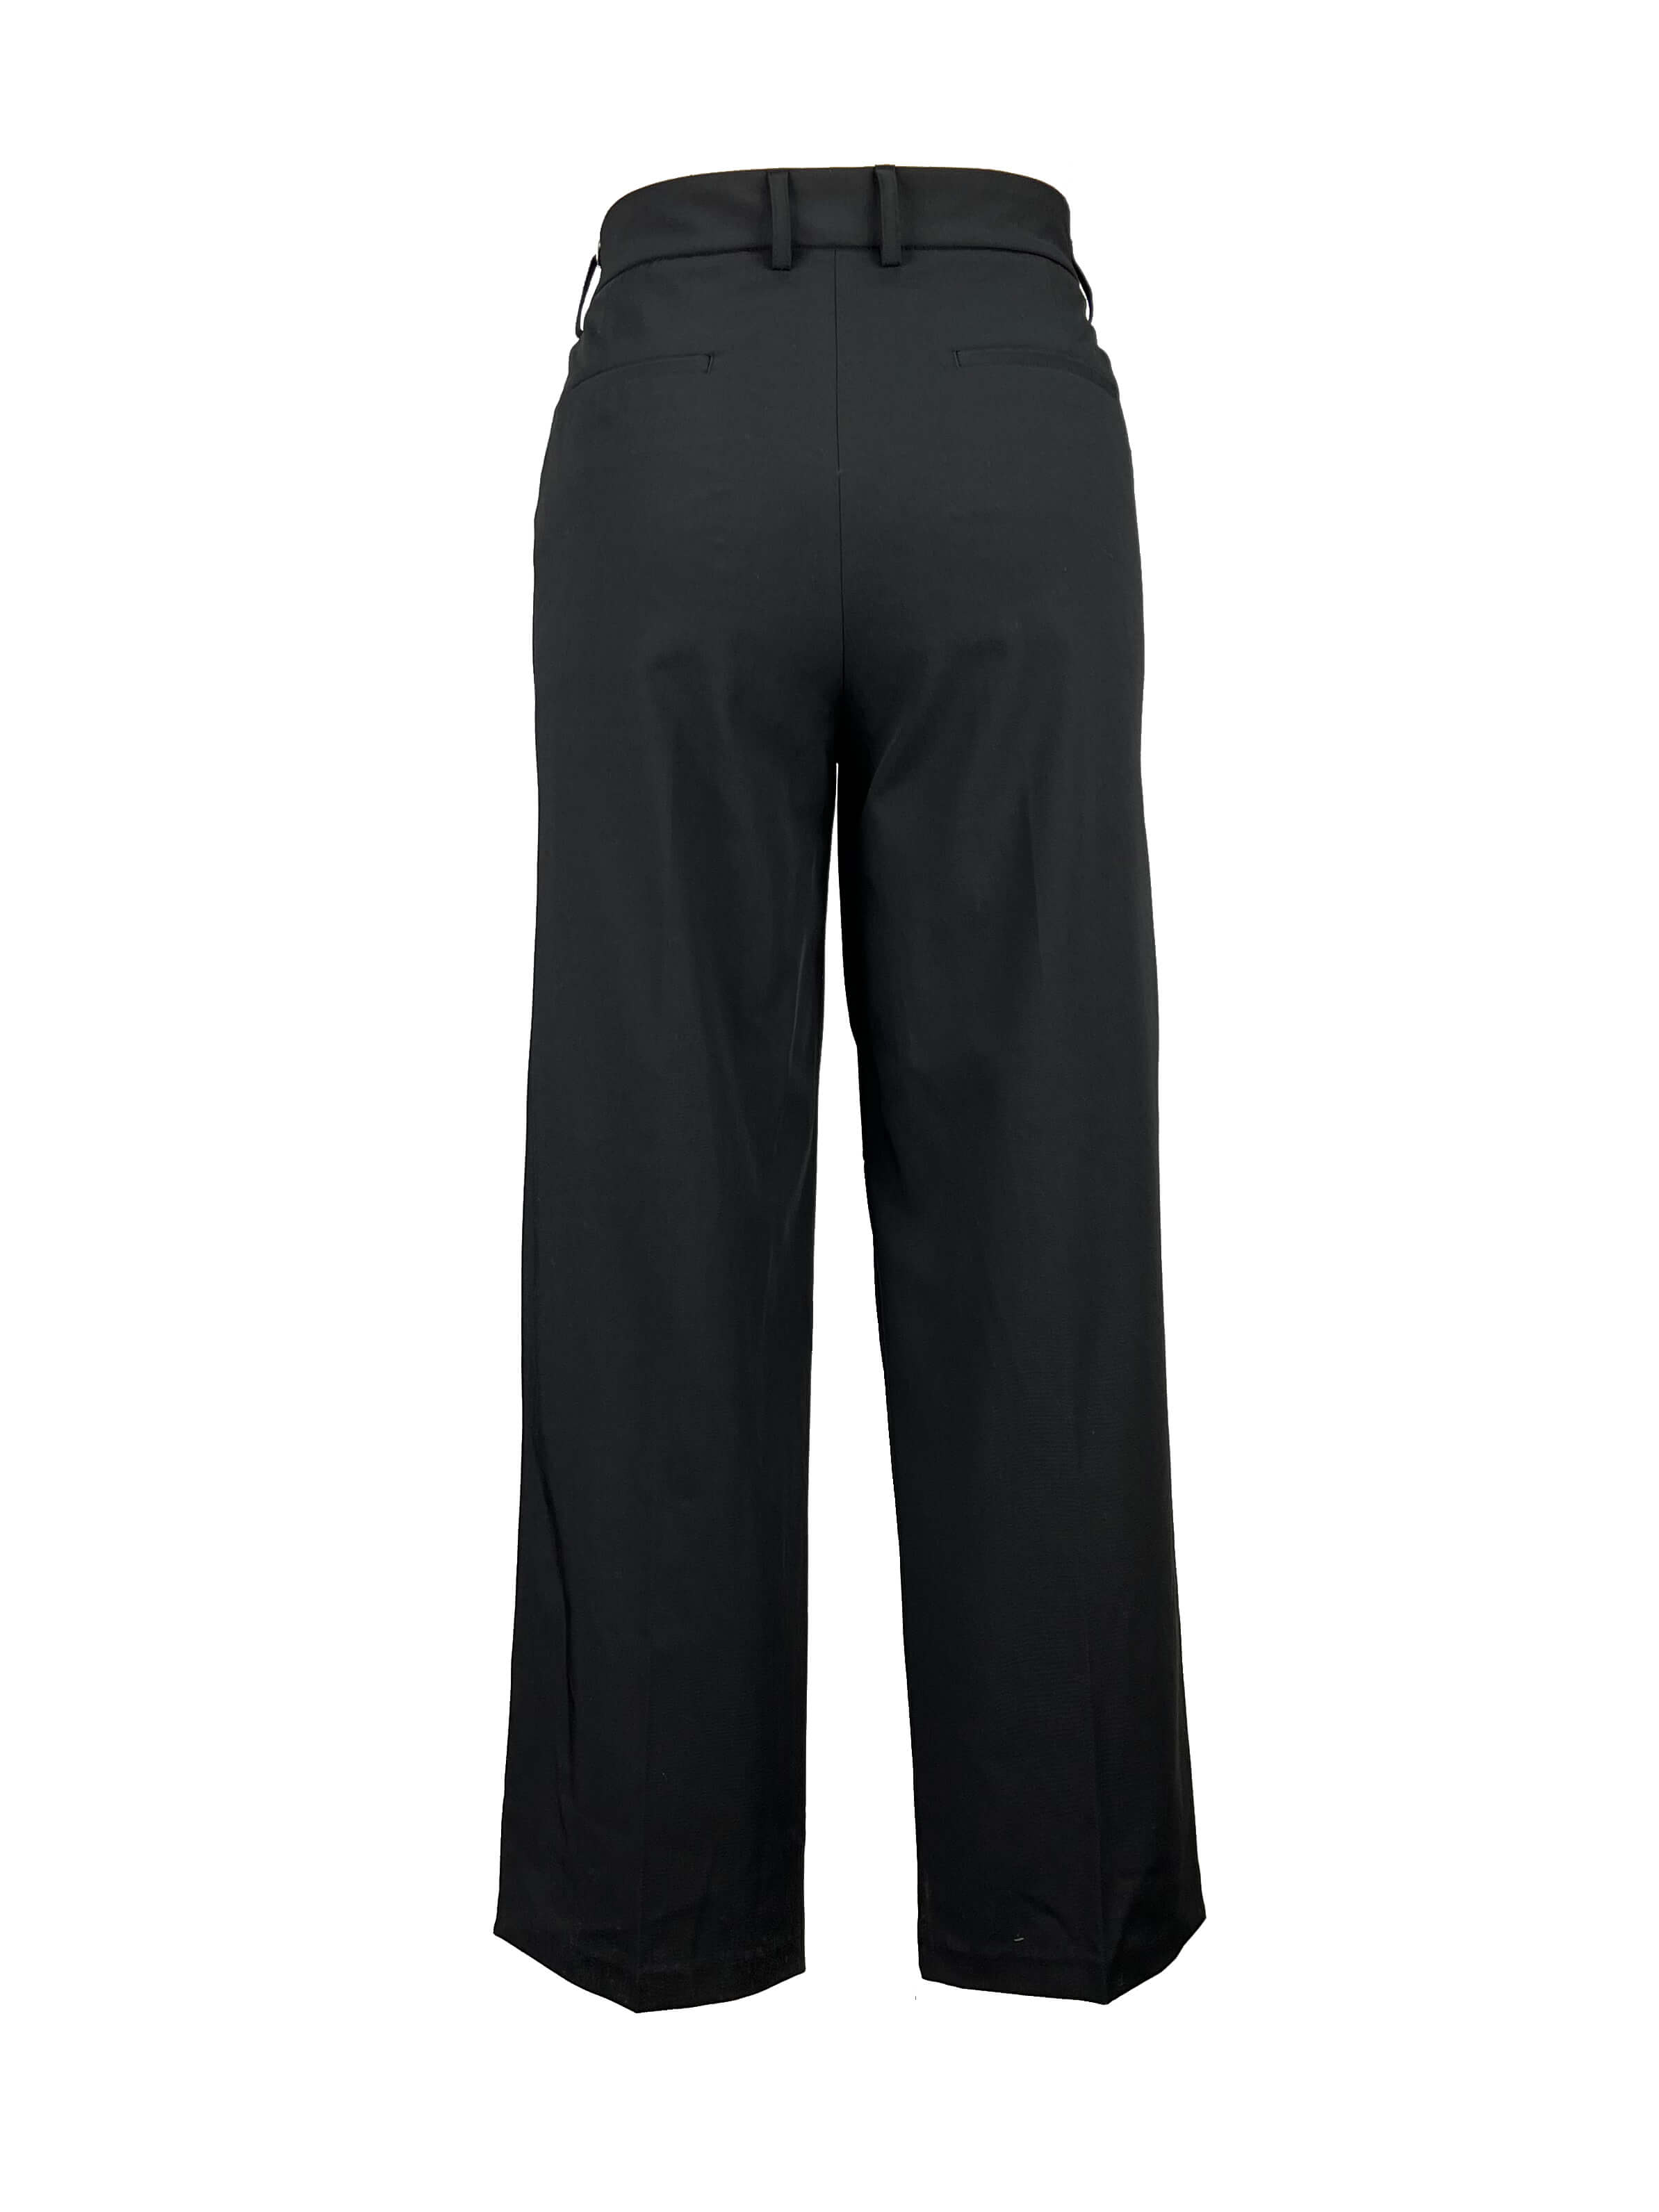 6.trousers (3)